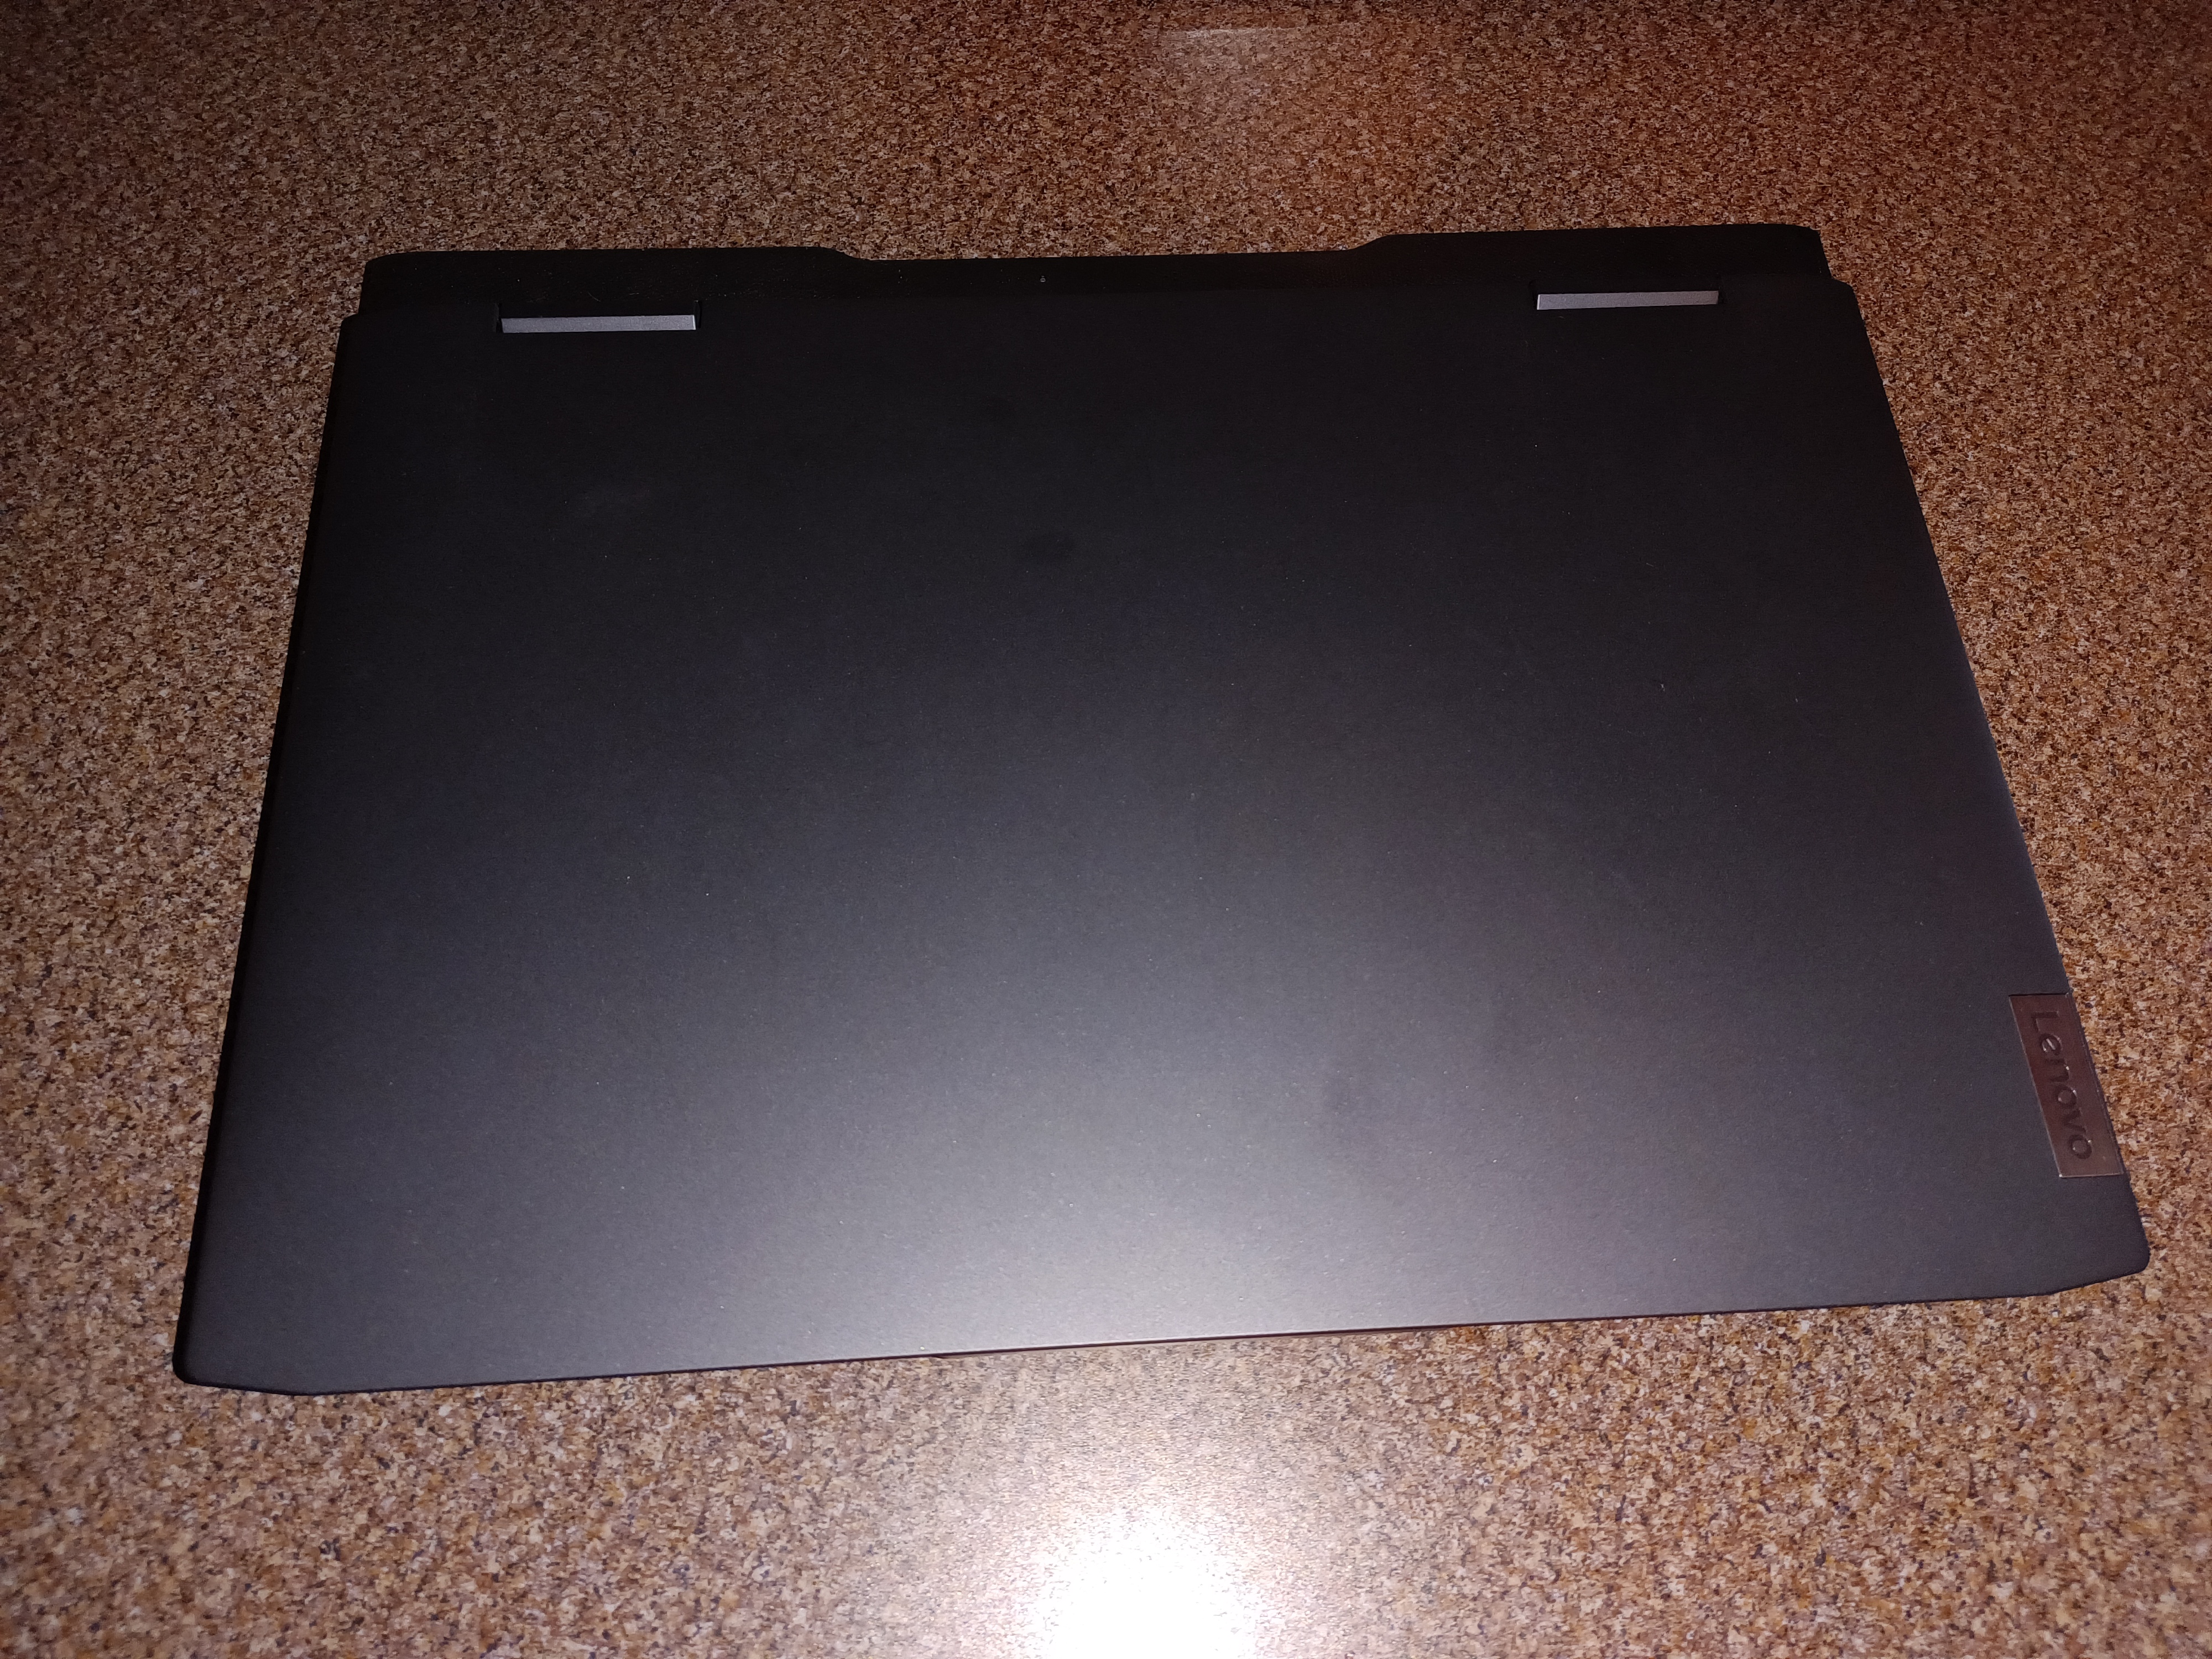 picture of a gaming laptop